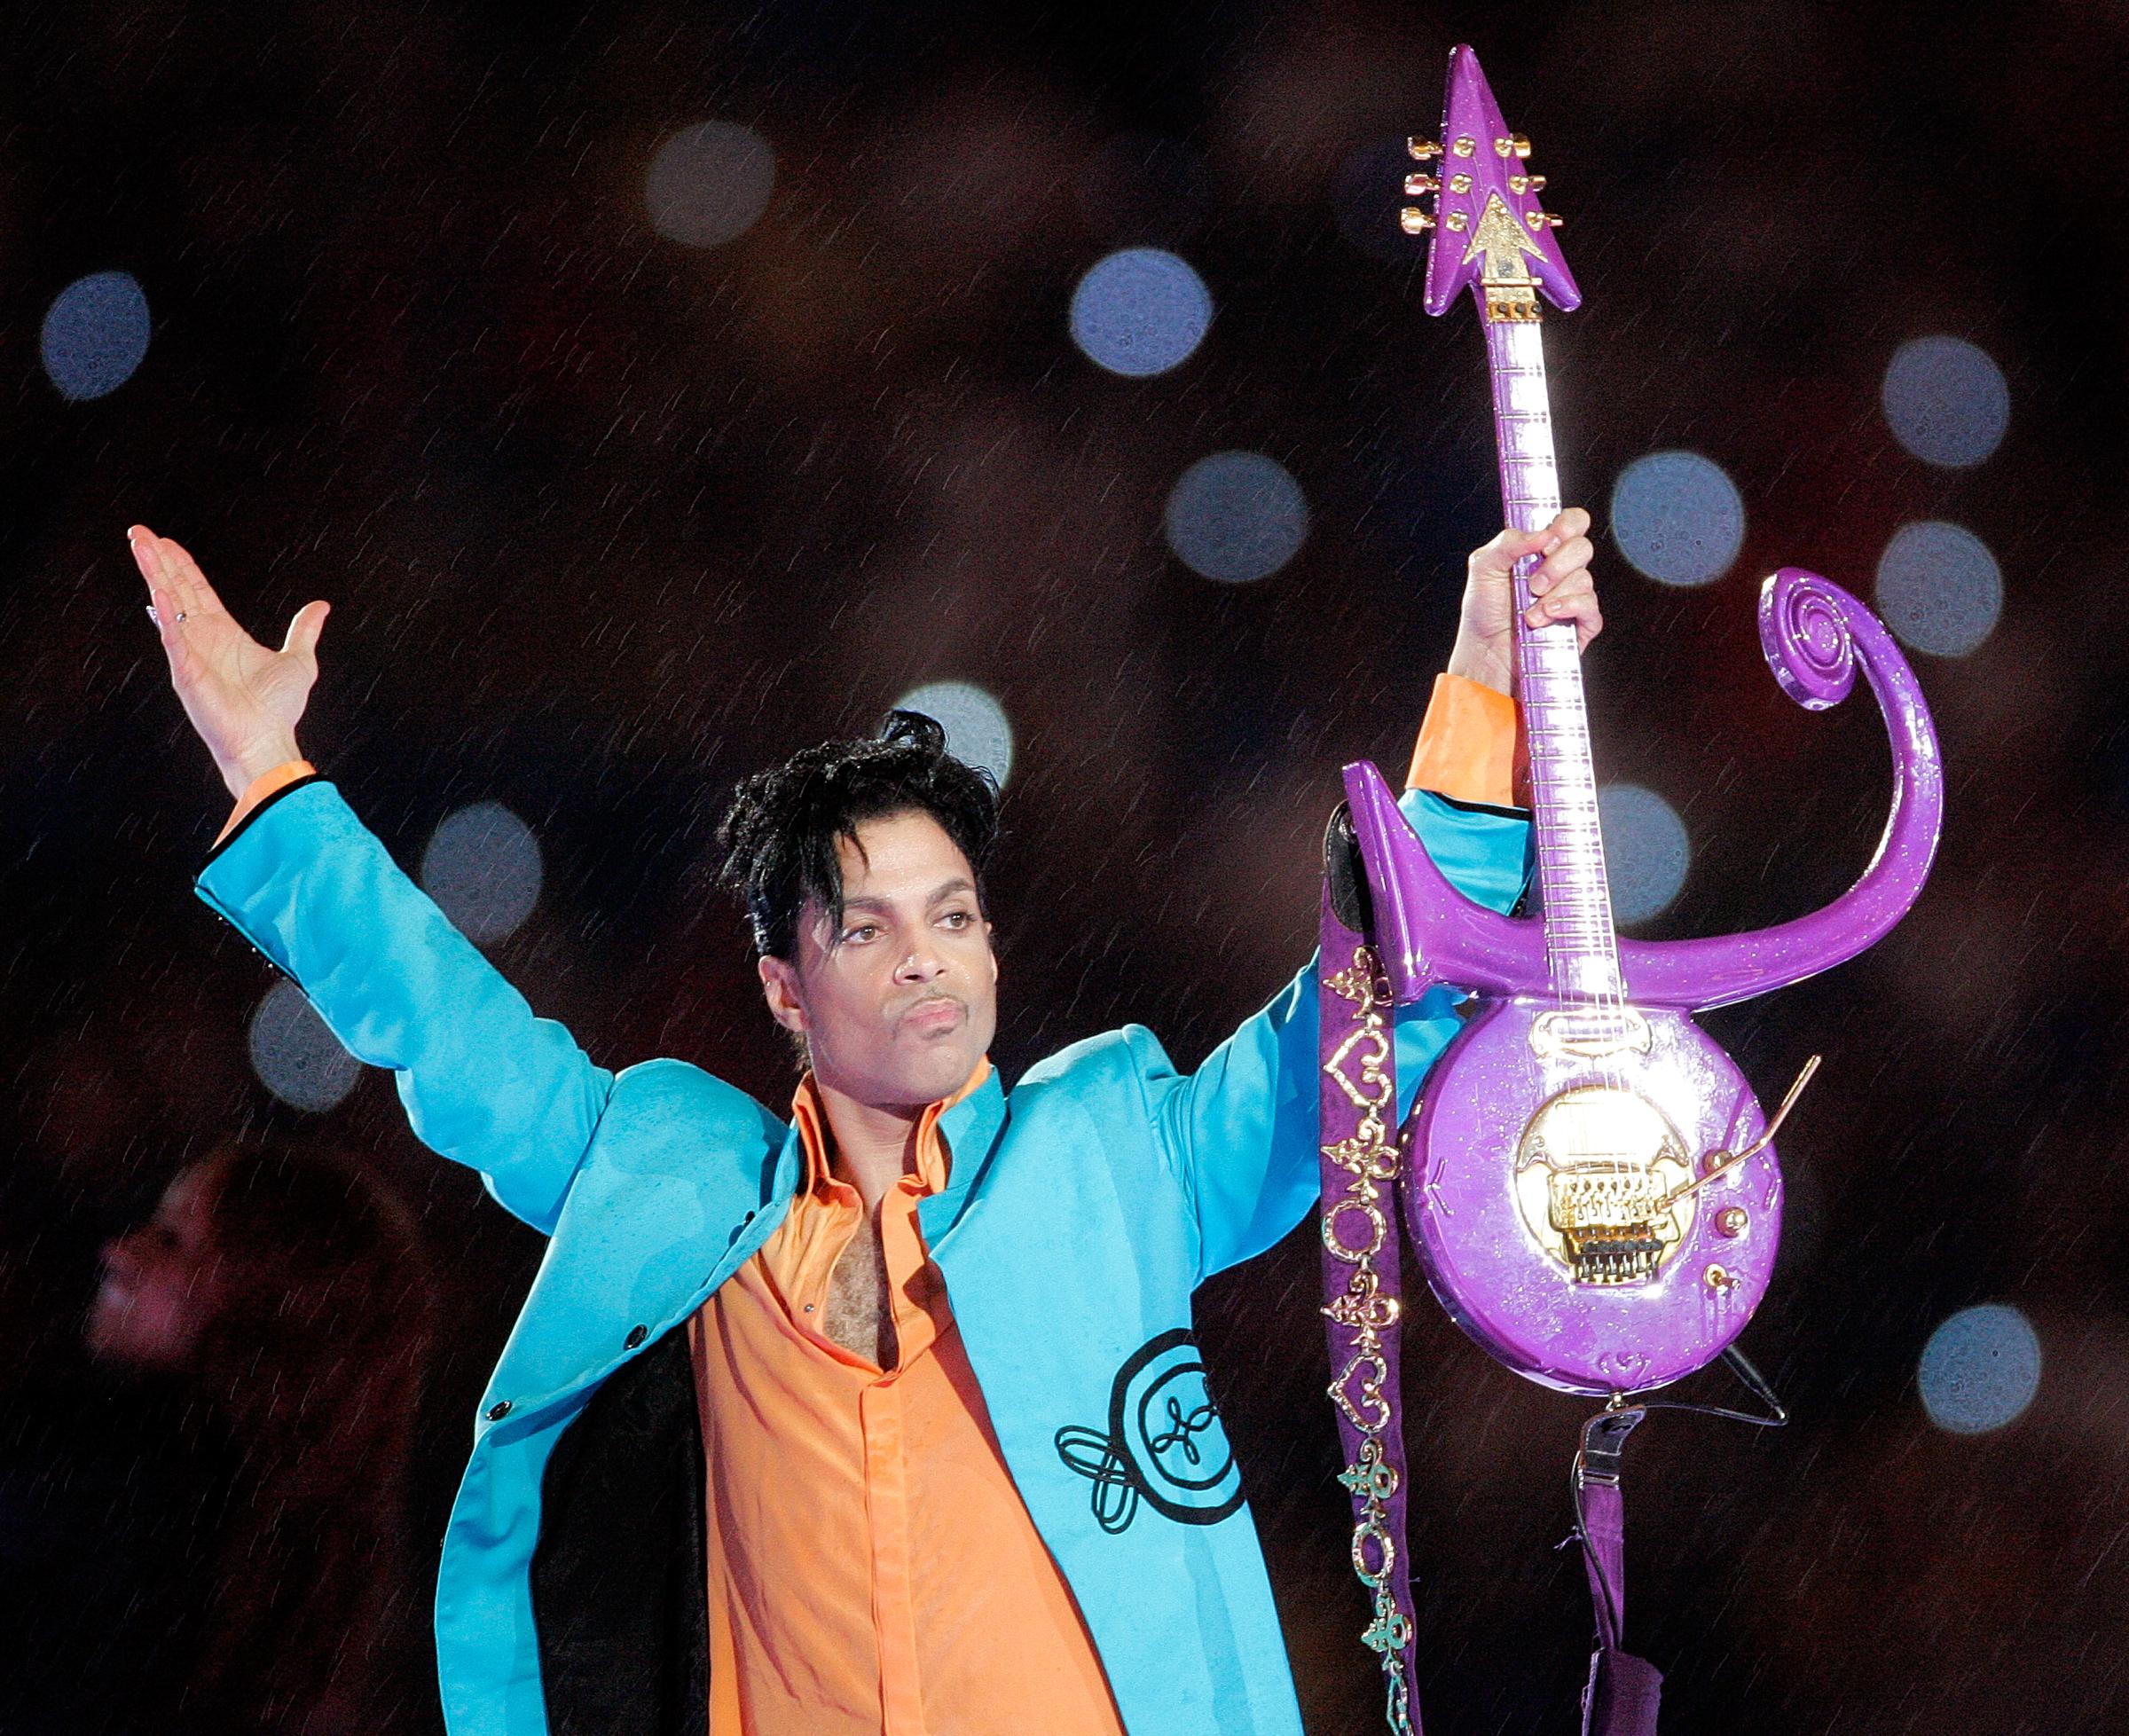 Prince performs during Super Bowl XLI in Miami on Feb. 4, 2007.